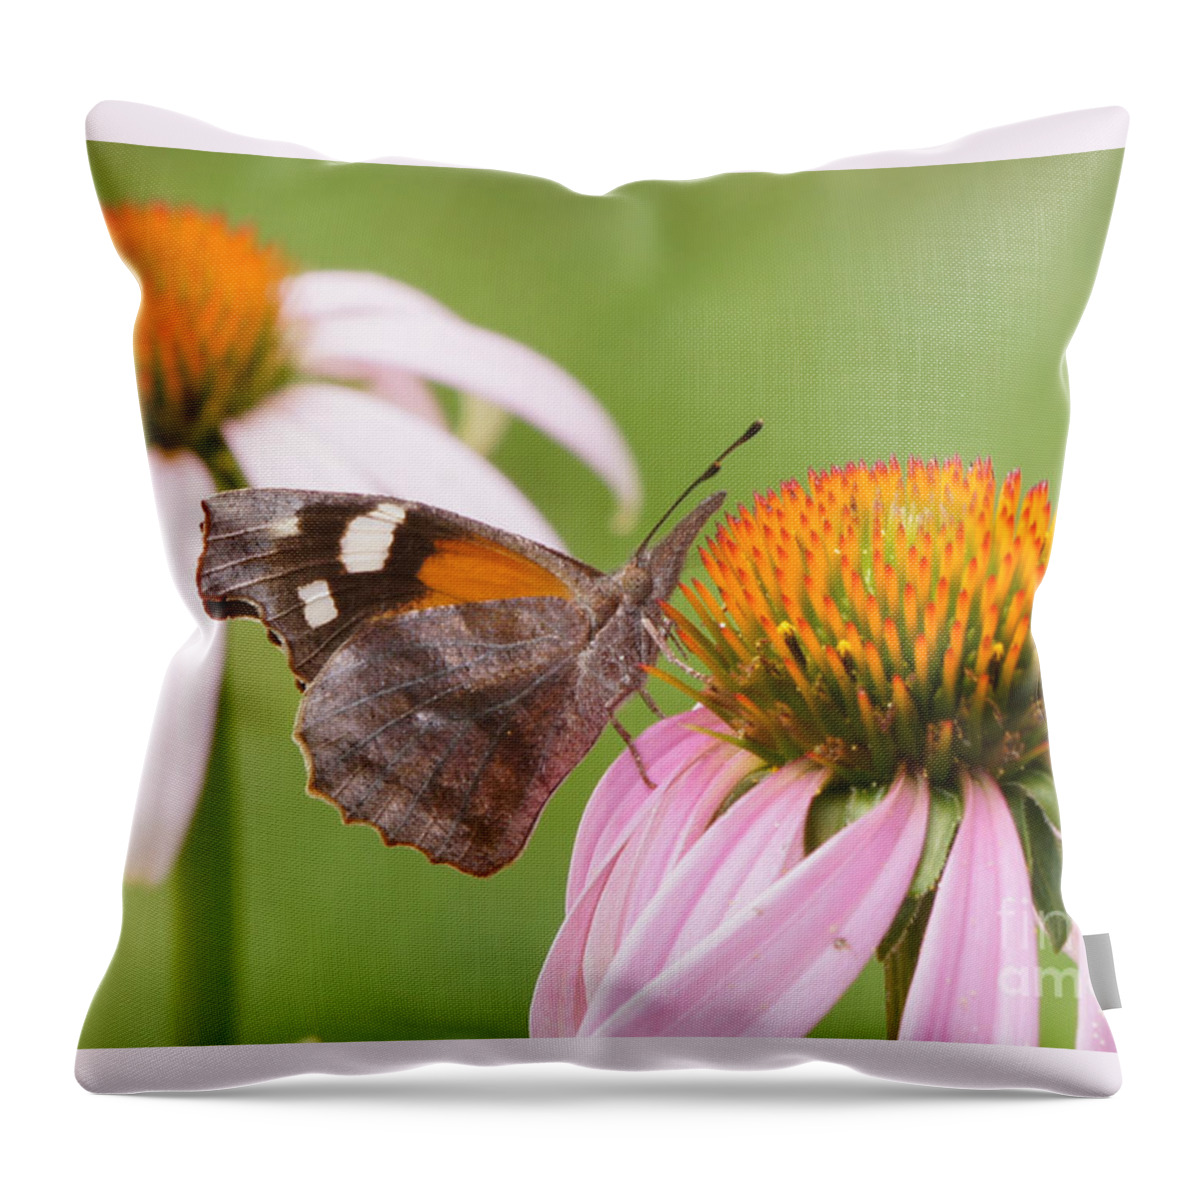 American Snout Throw Pillow featuring the photograph American Snout Butterfly on Echinacea by Robert E Alter Reflections of Infinity